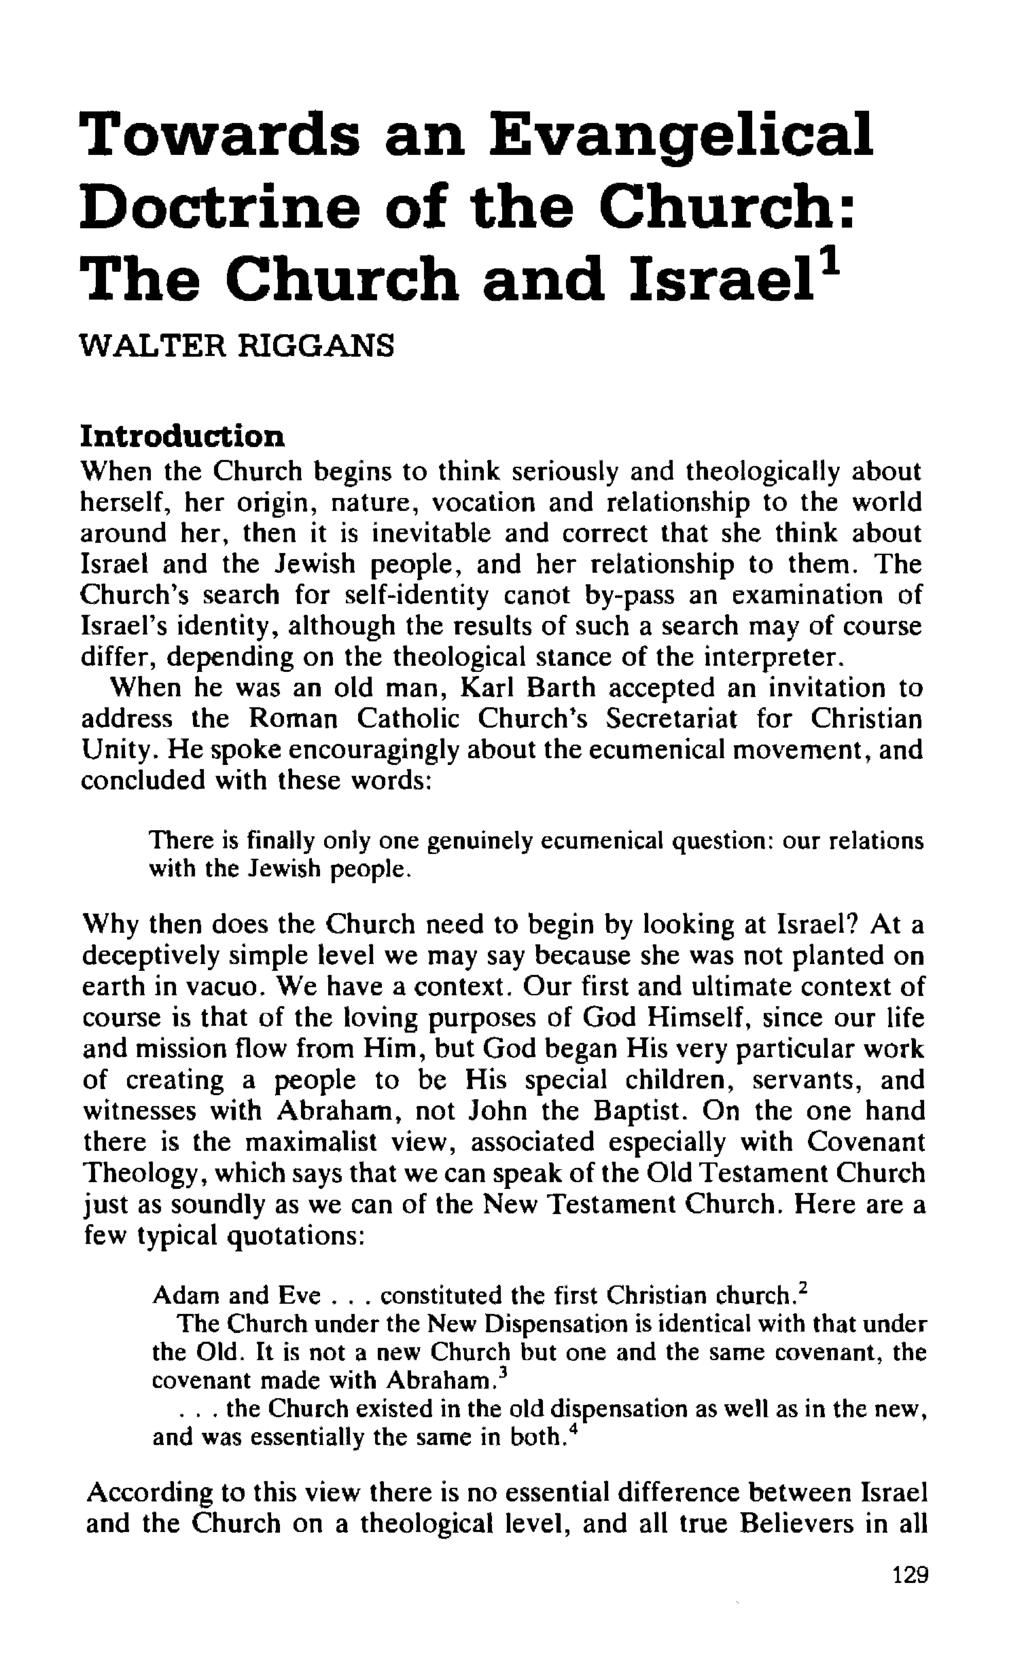 Towards an Evangelical Doctrine of the Church: The Church and Israel 1 WALTER RIGGANS Introduction When the Church begins to think seriously and theologically about herself, her origin, nature,